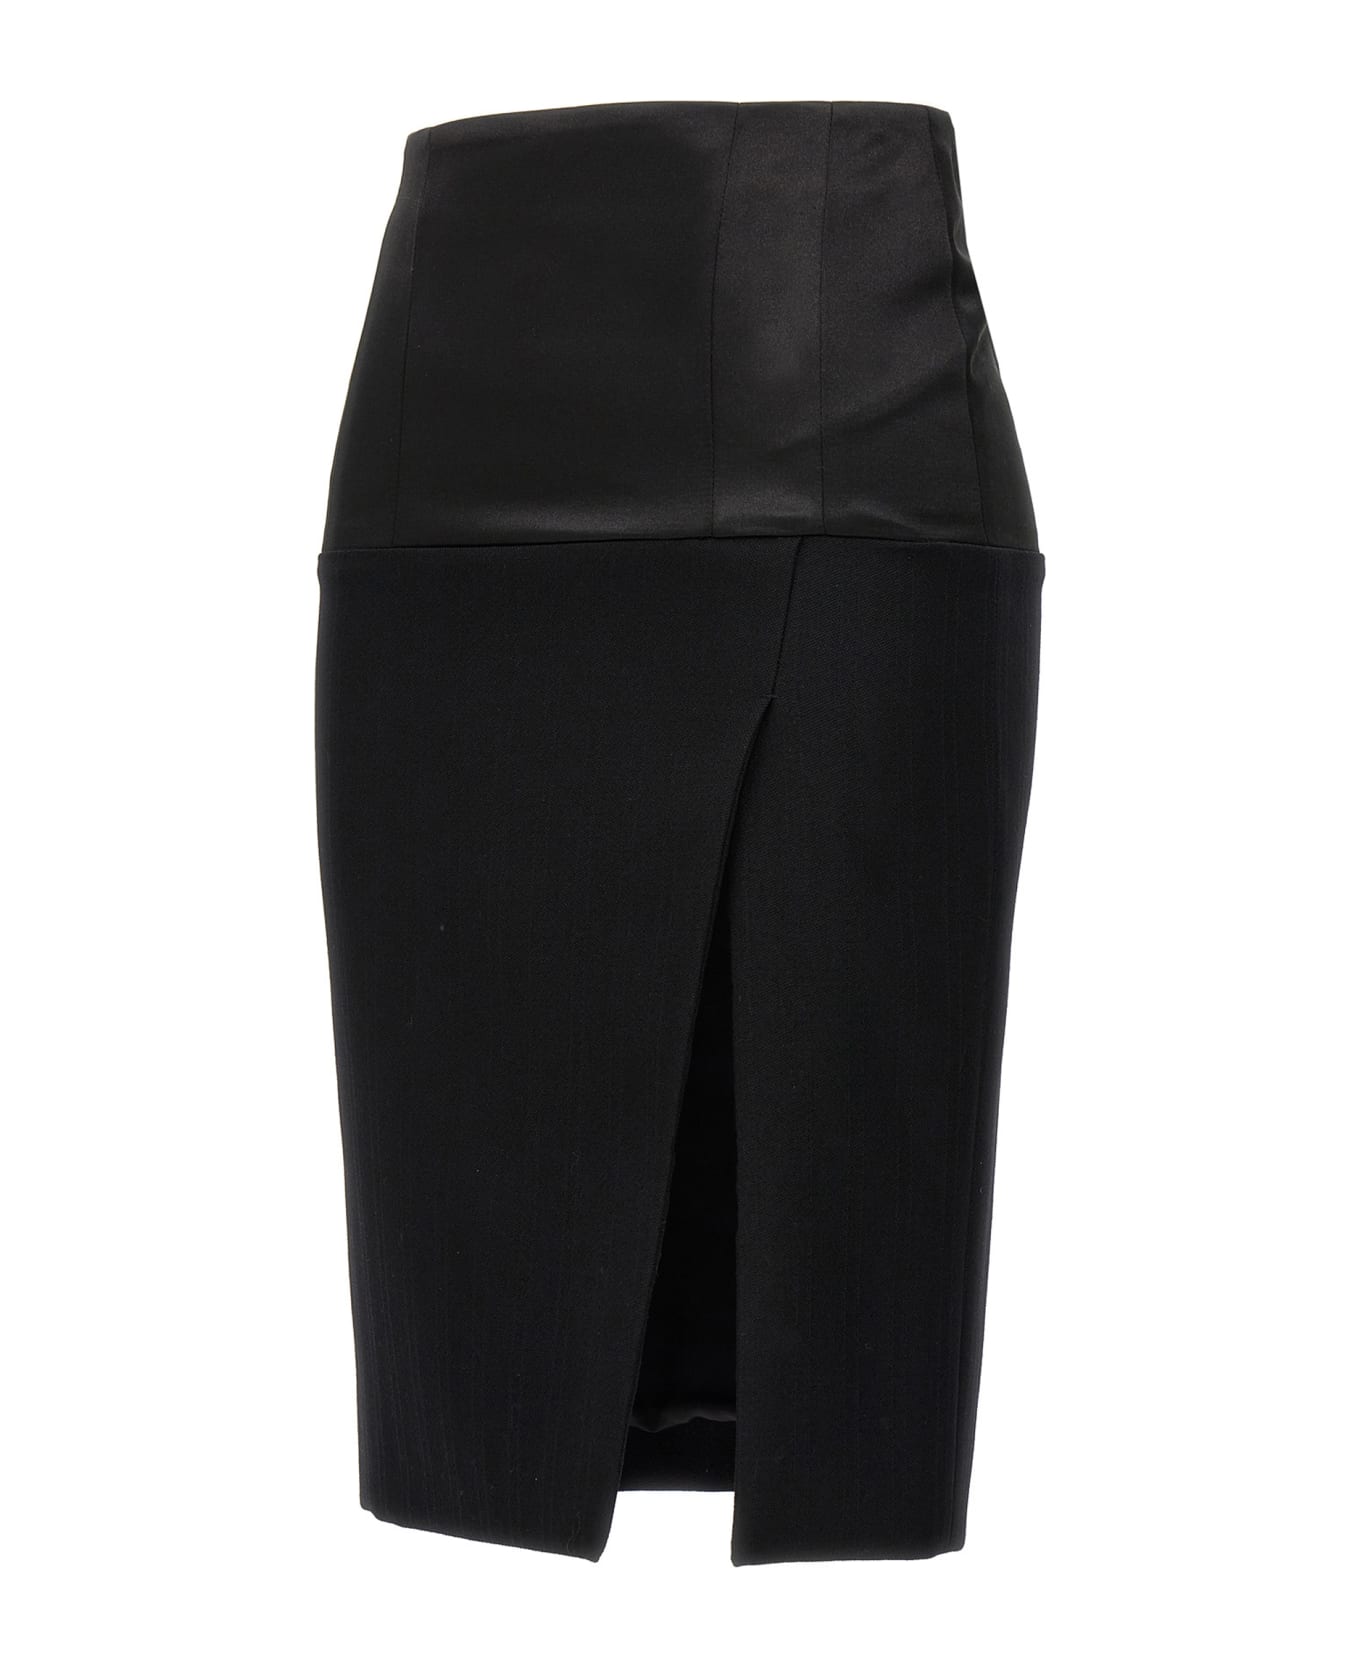 Givenchy Tailored Skirt - Black  